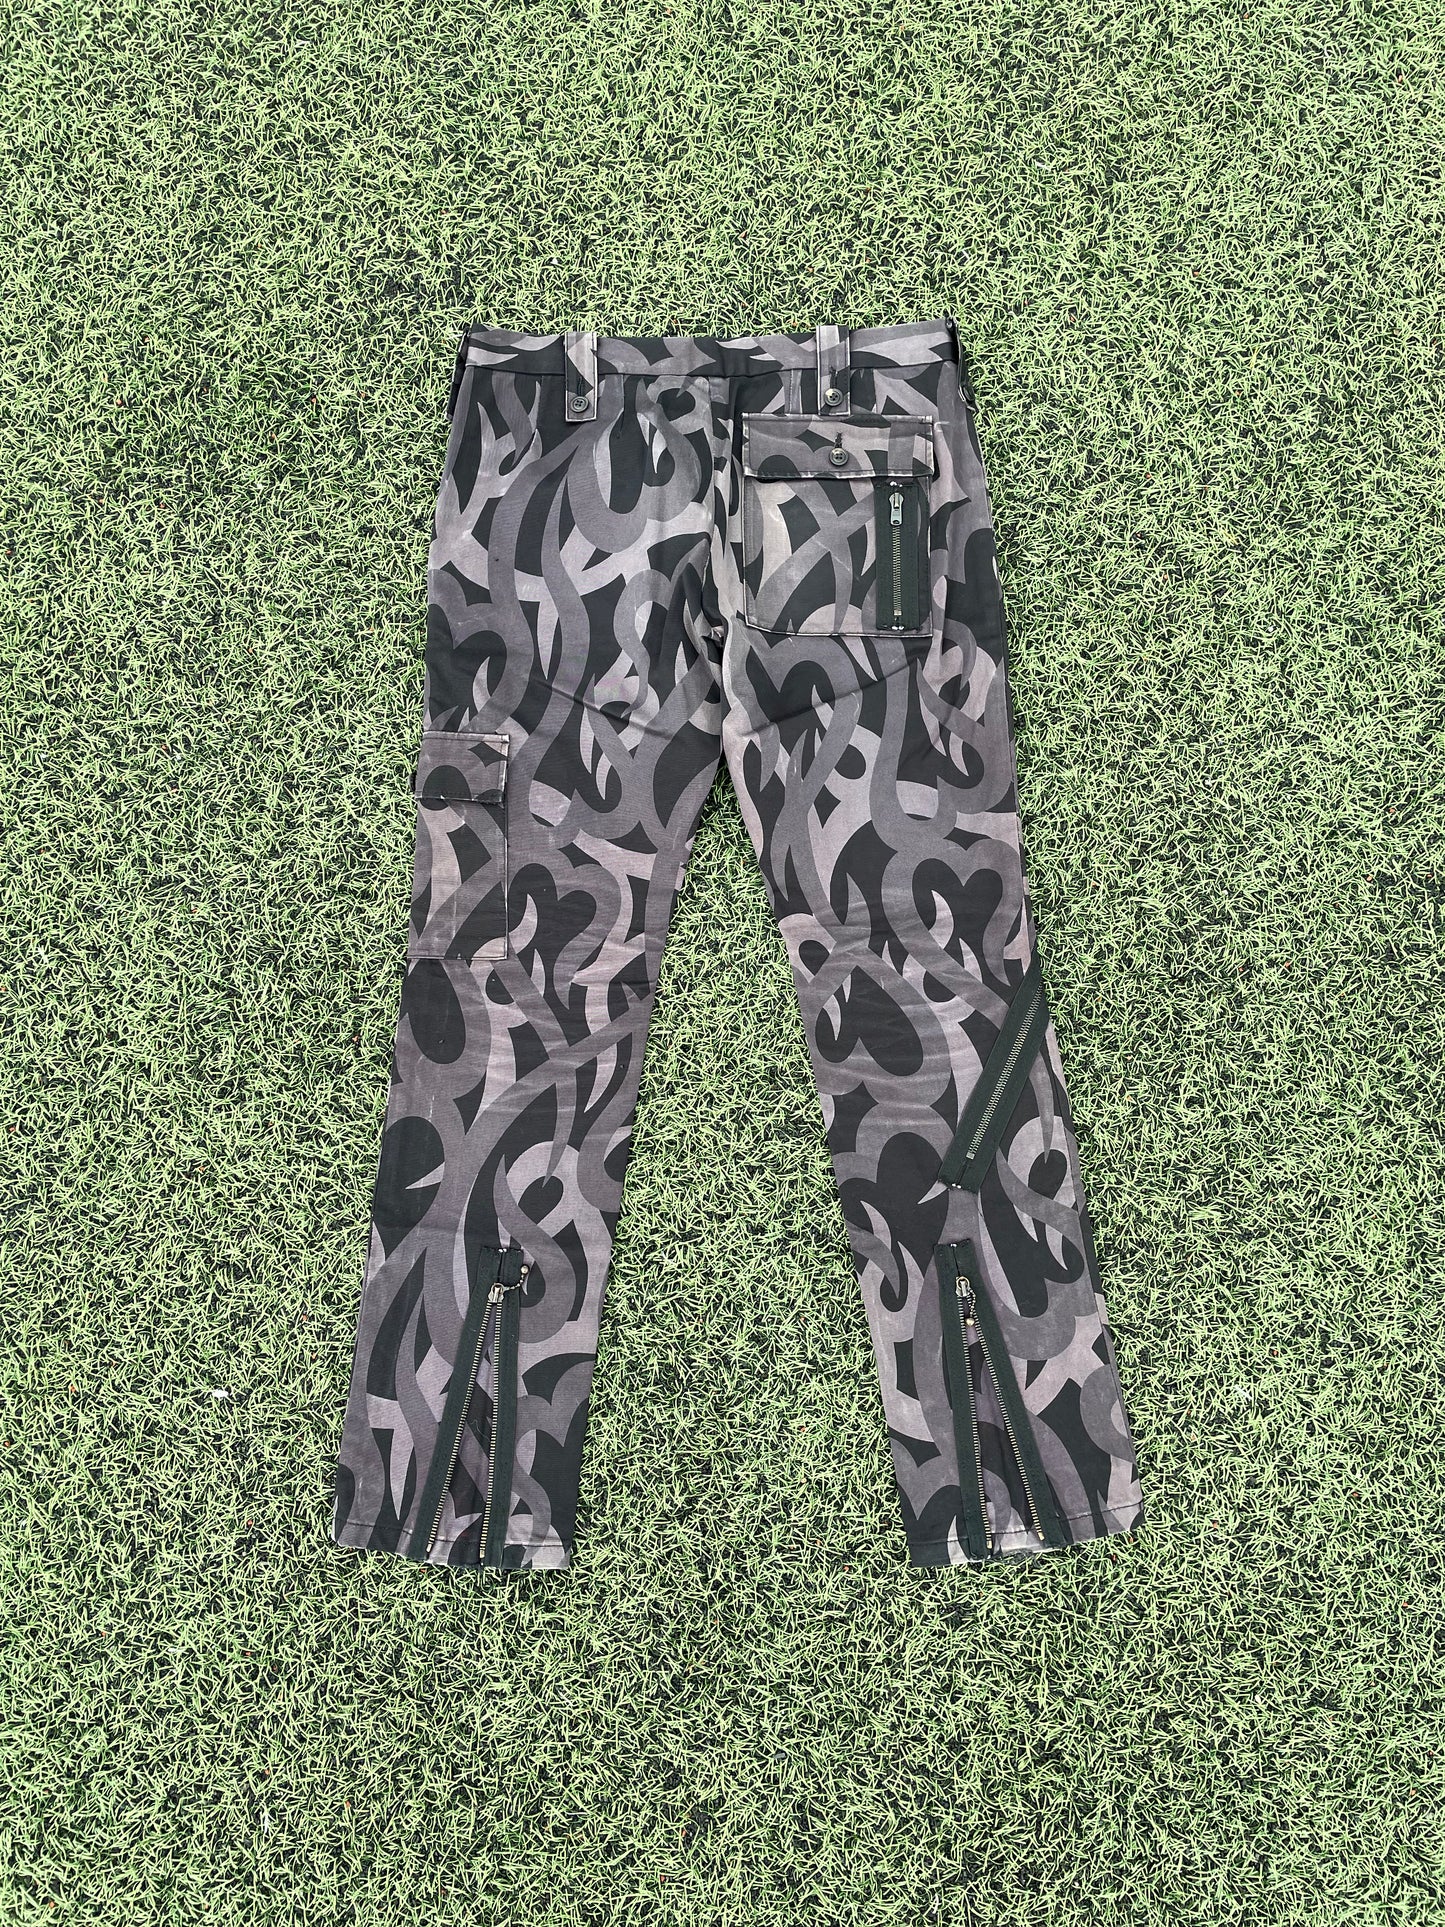 AW04 “Give Peace A Chance” - Number (N)ine Tribal Camo Set